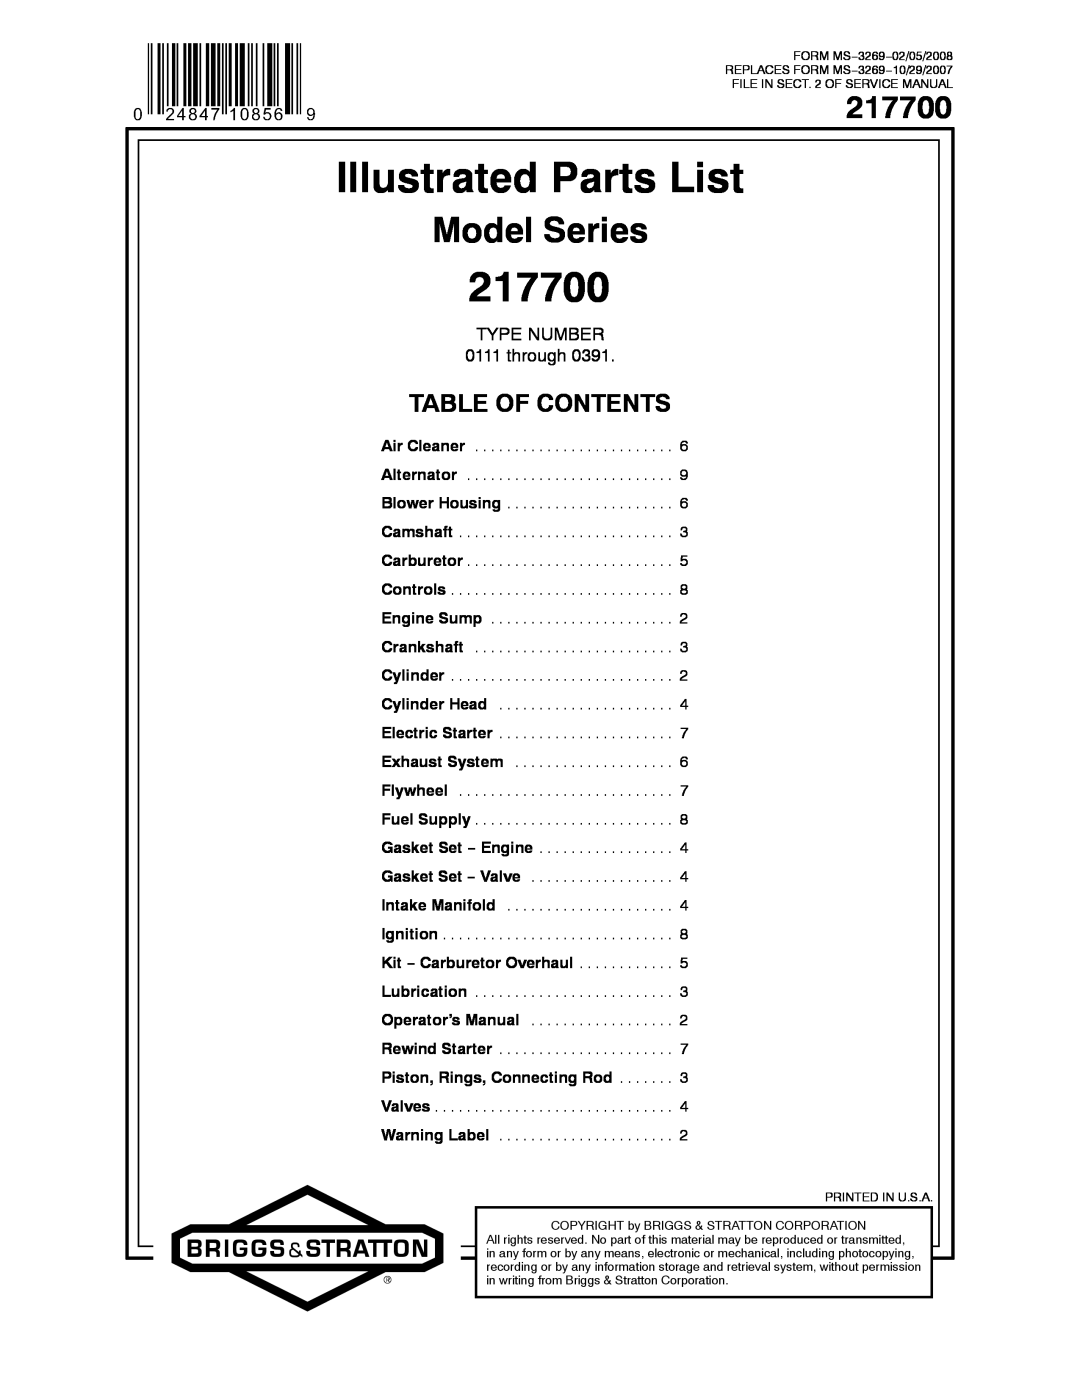 Briggs & Stratton 217700 service manual Model Series, Illustrated Parts List, Table Of Contents, TYPE NUMBER 0111 through 